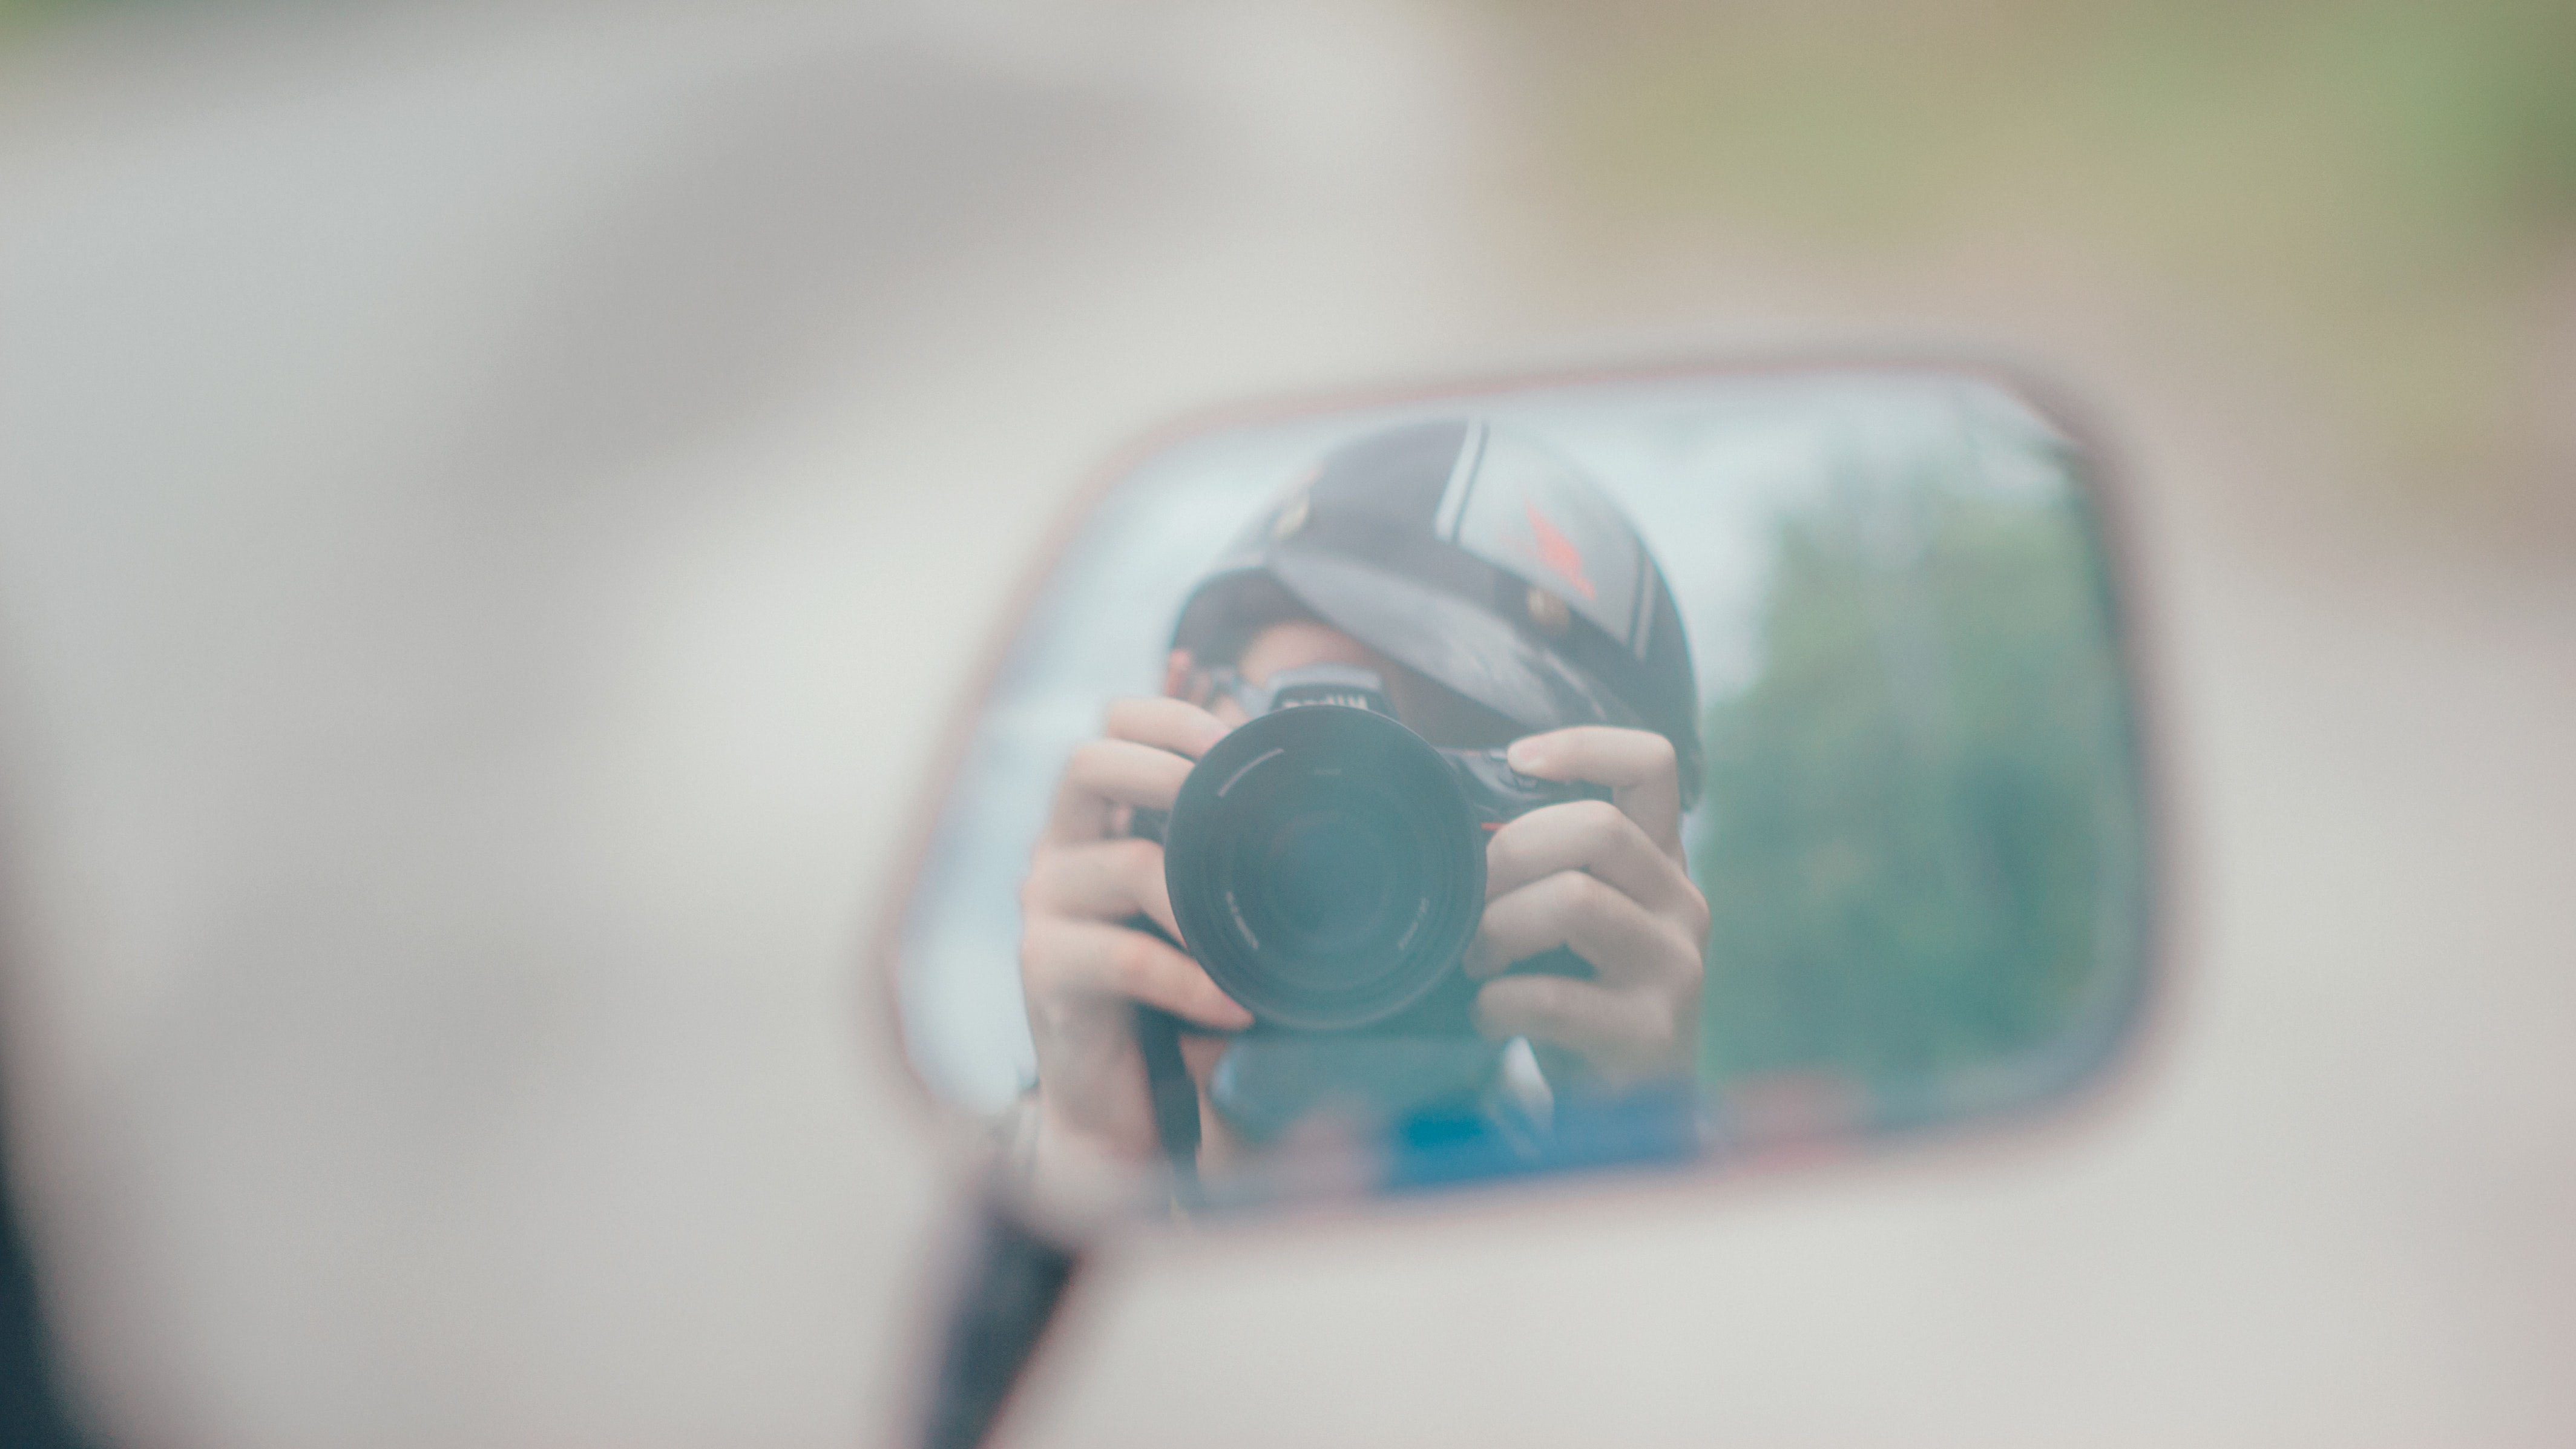 Shallow focus photography of person holding dslr camera in mirror reflection